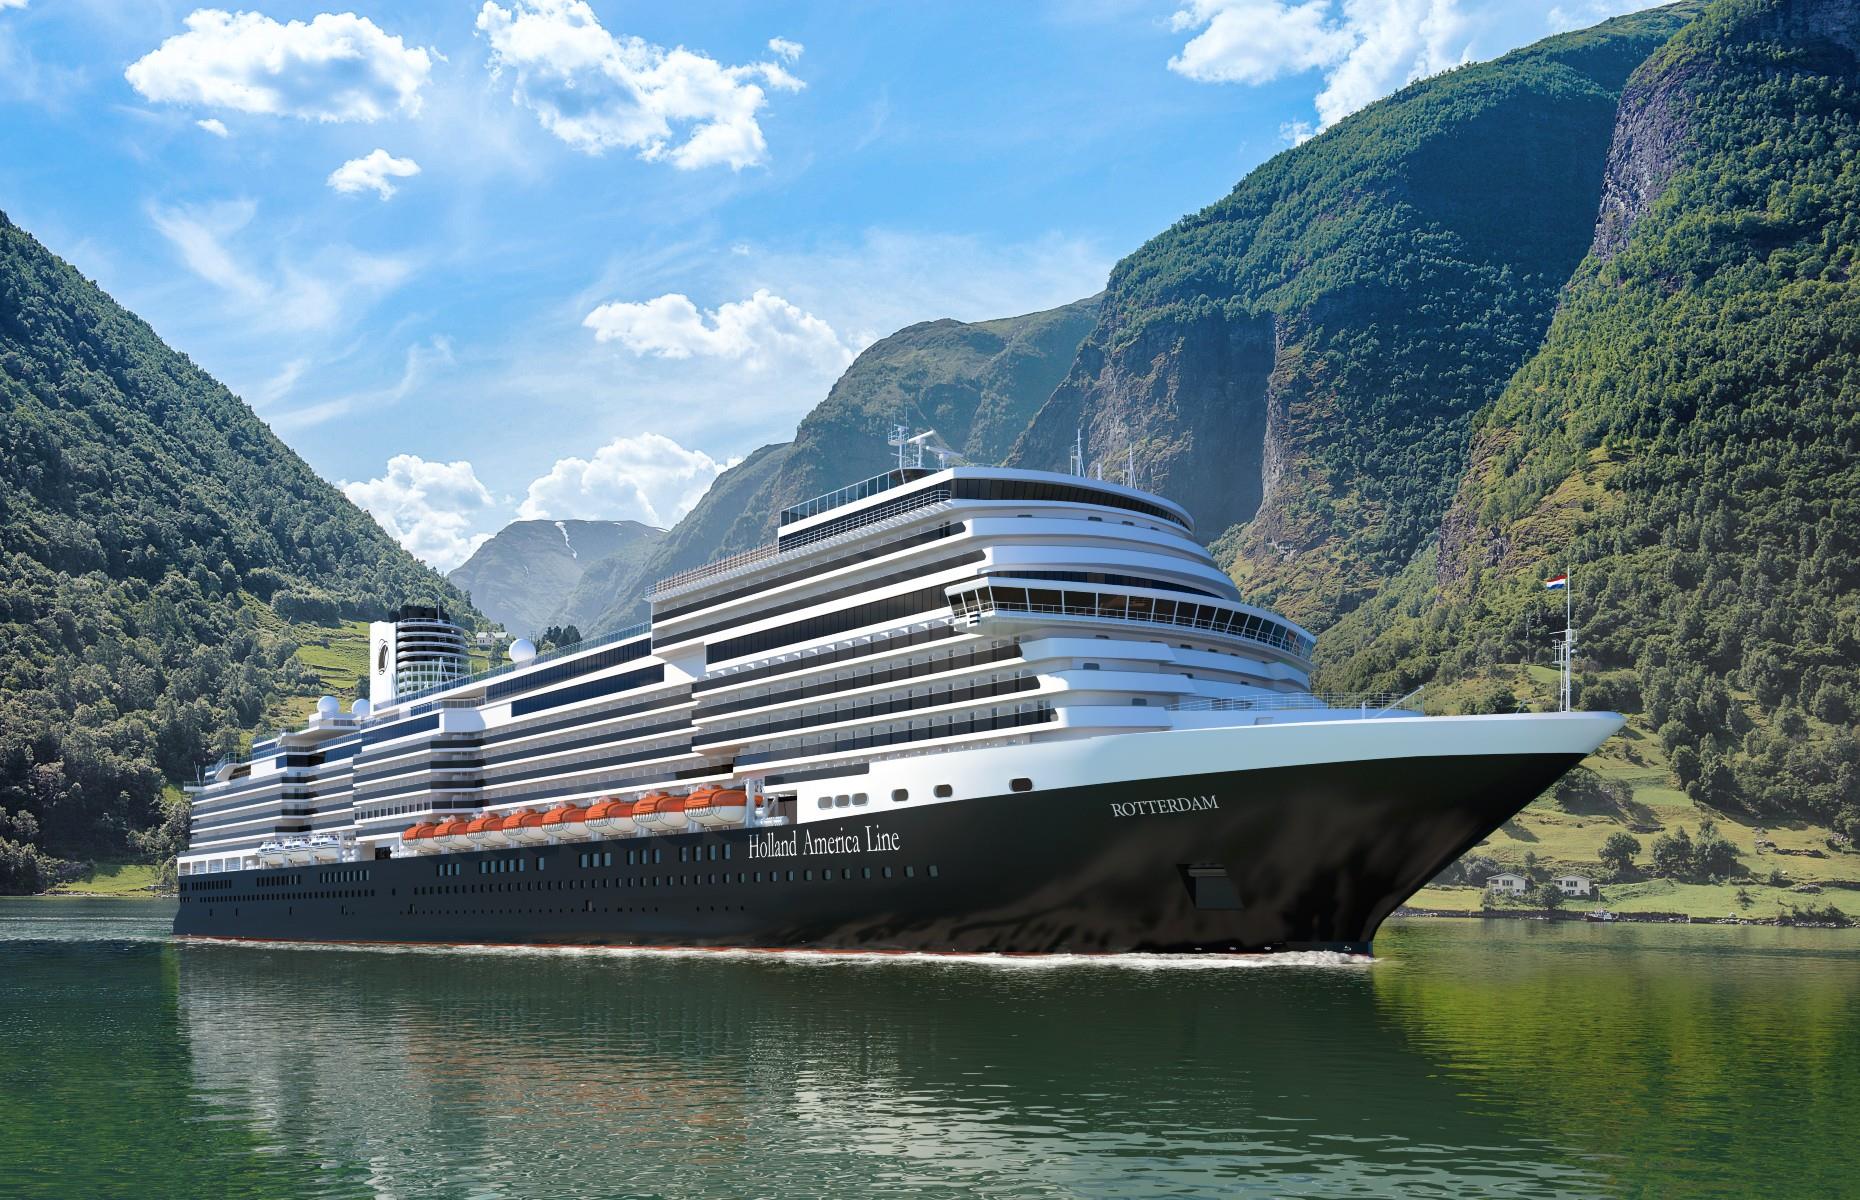 <p>The 2,668-guest <a href="https://www.hollandamerica.com/en_US/cruise-ships/ms-rotterdam/0.html">MS Rotterdam</a> is the third in the Pinnacle Class series for Holland America Line. At 984 feet (300m) in length, the craftsmanship used to create the classic nautical lines of the ship’s exterior reflects almost 150 years of expertise within the company. Her interiors dazzle too, with fluid lines, vibrant colors and airy, light-filled spaces from the shared areas to the staterooms and suites.</p>